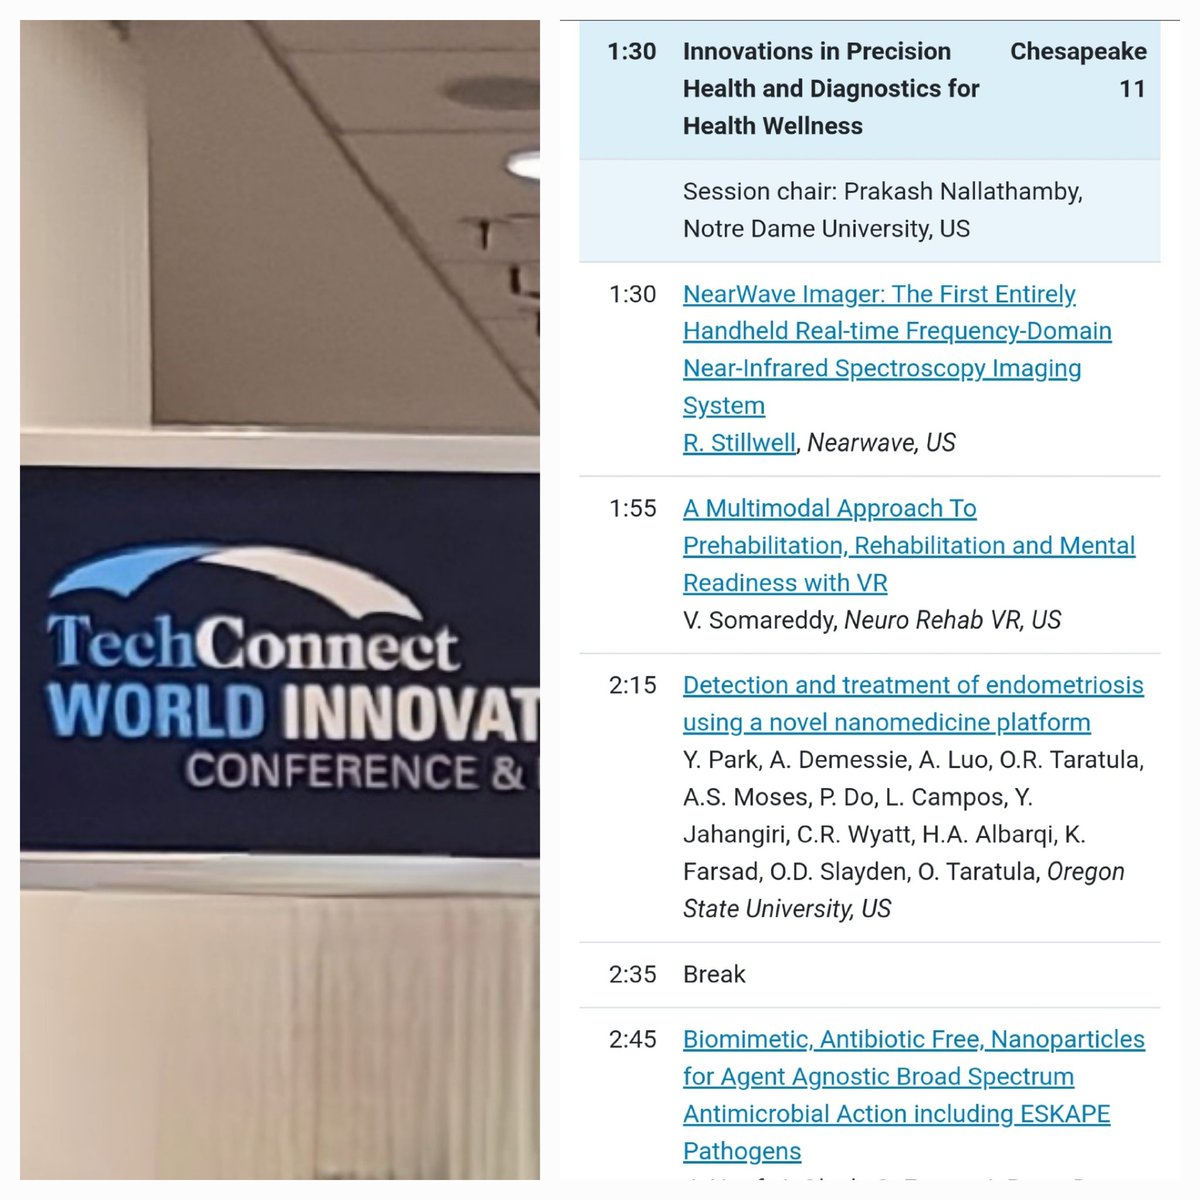 Excited to chair this session on #precisionhealth at #techconnect2023 and having Roy Stillwell co-founder of #NotreDame  #startup Nearwave be the keynote speaker about their revolutionary non-invasive diagnostic instrument. Stop by. @ND_IPH @UNDResearch